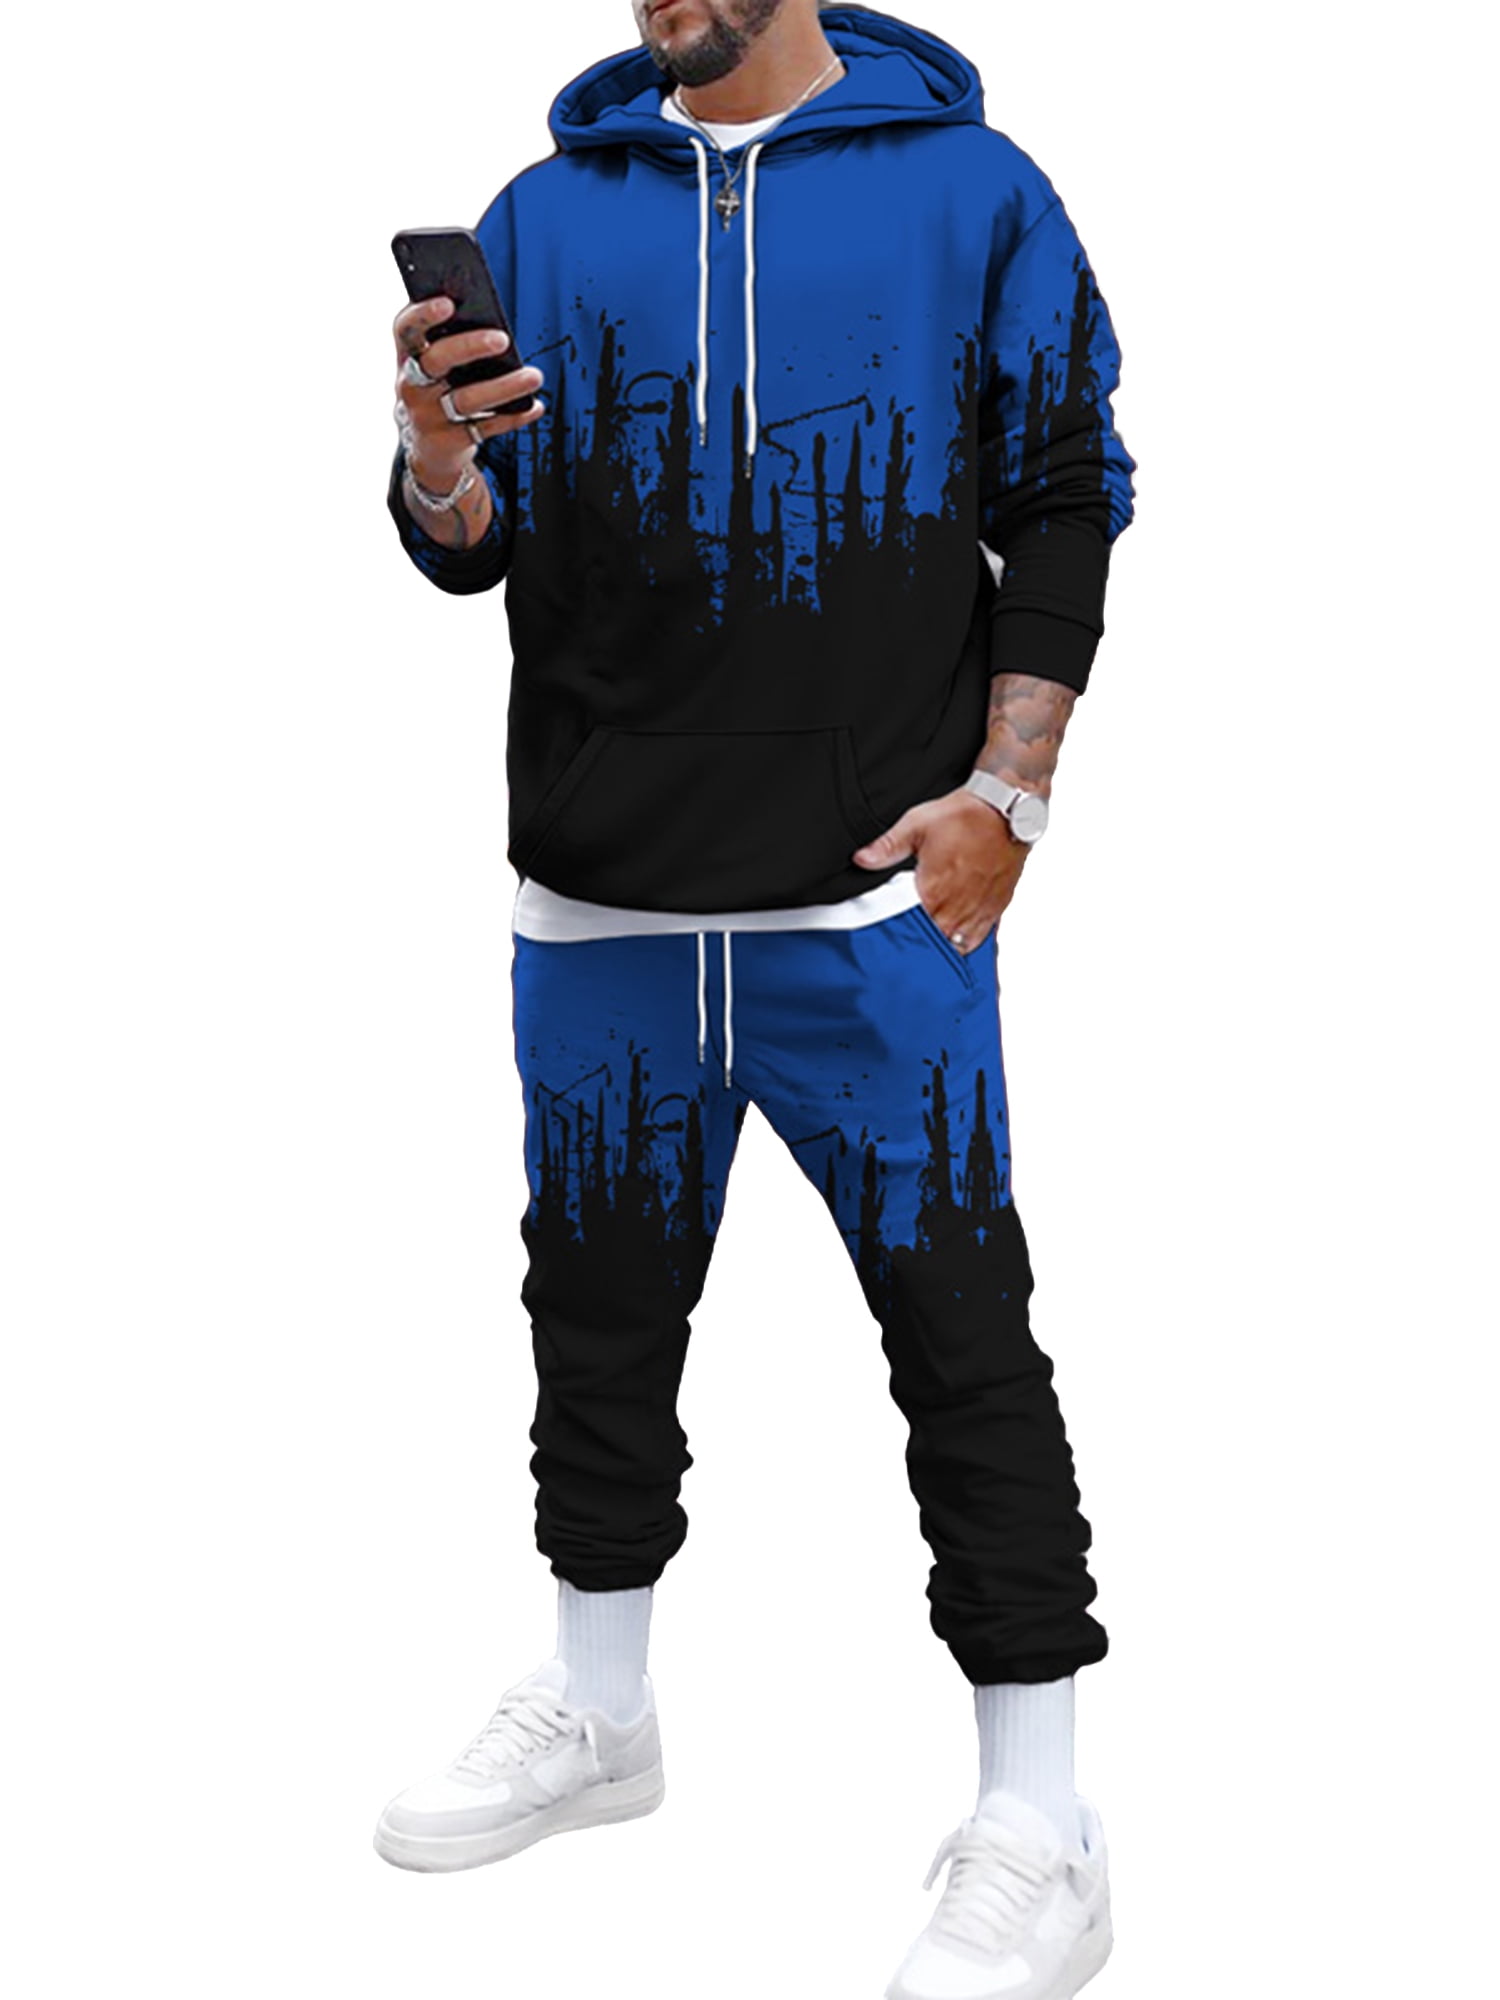 Casual Comfy Jogging Suits for Men Mens Active Hoodies Tracksuit Malcolm X Lightweight Sweatshirts